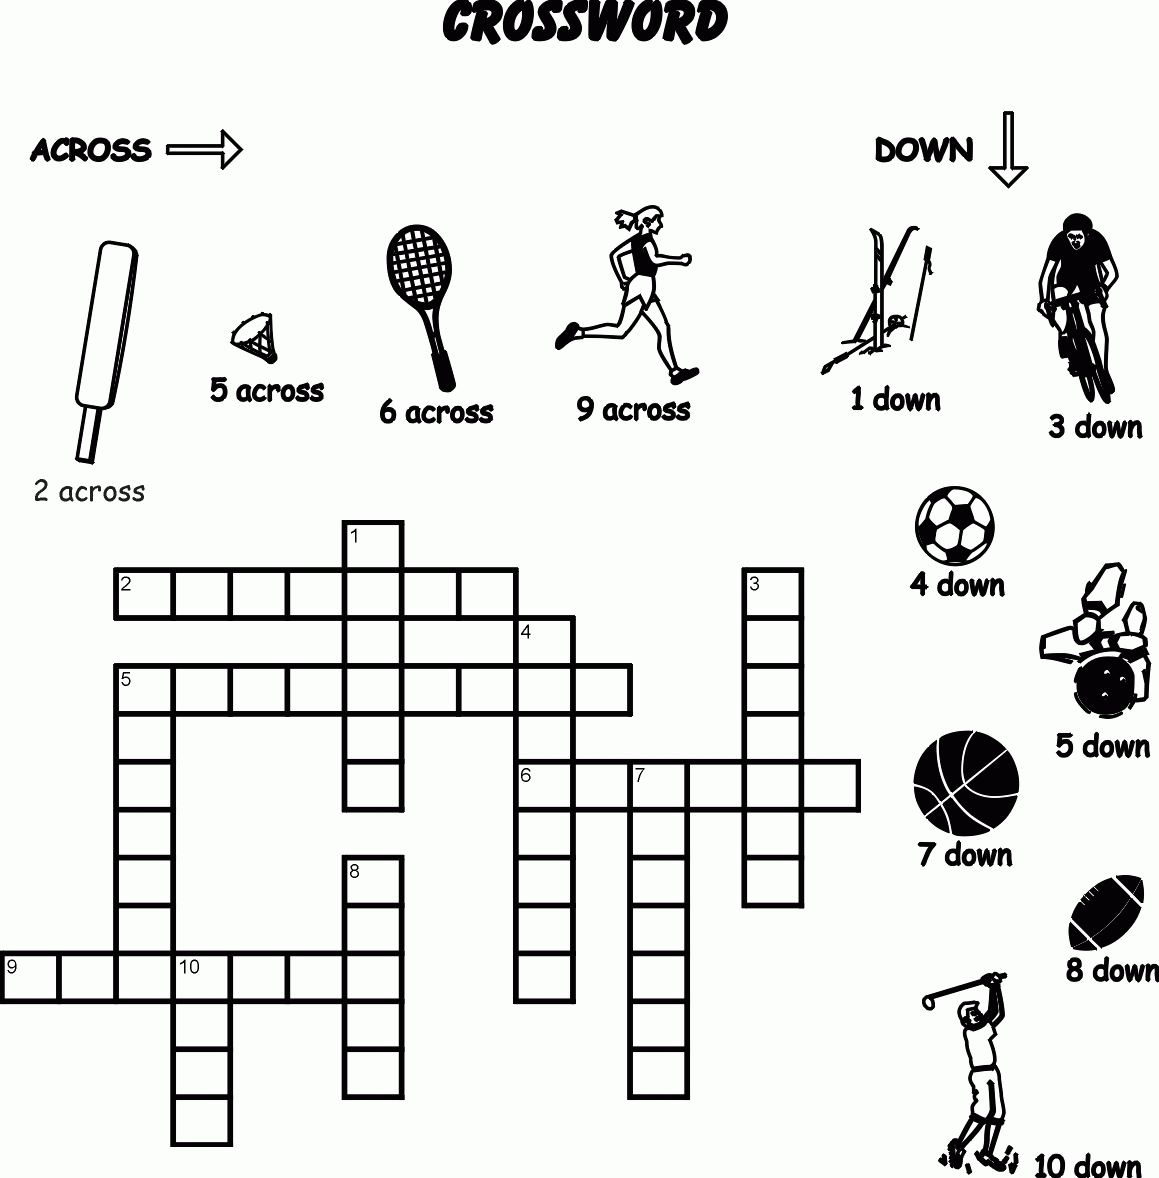 14 Sports Crossword Puzzles | Kittybabylove - Printable Sports Crossword Puzzles For Adults